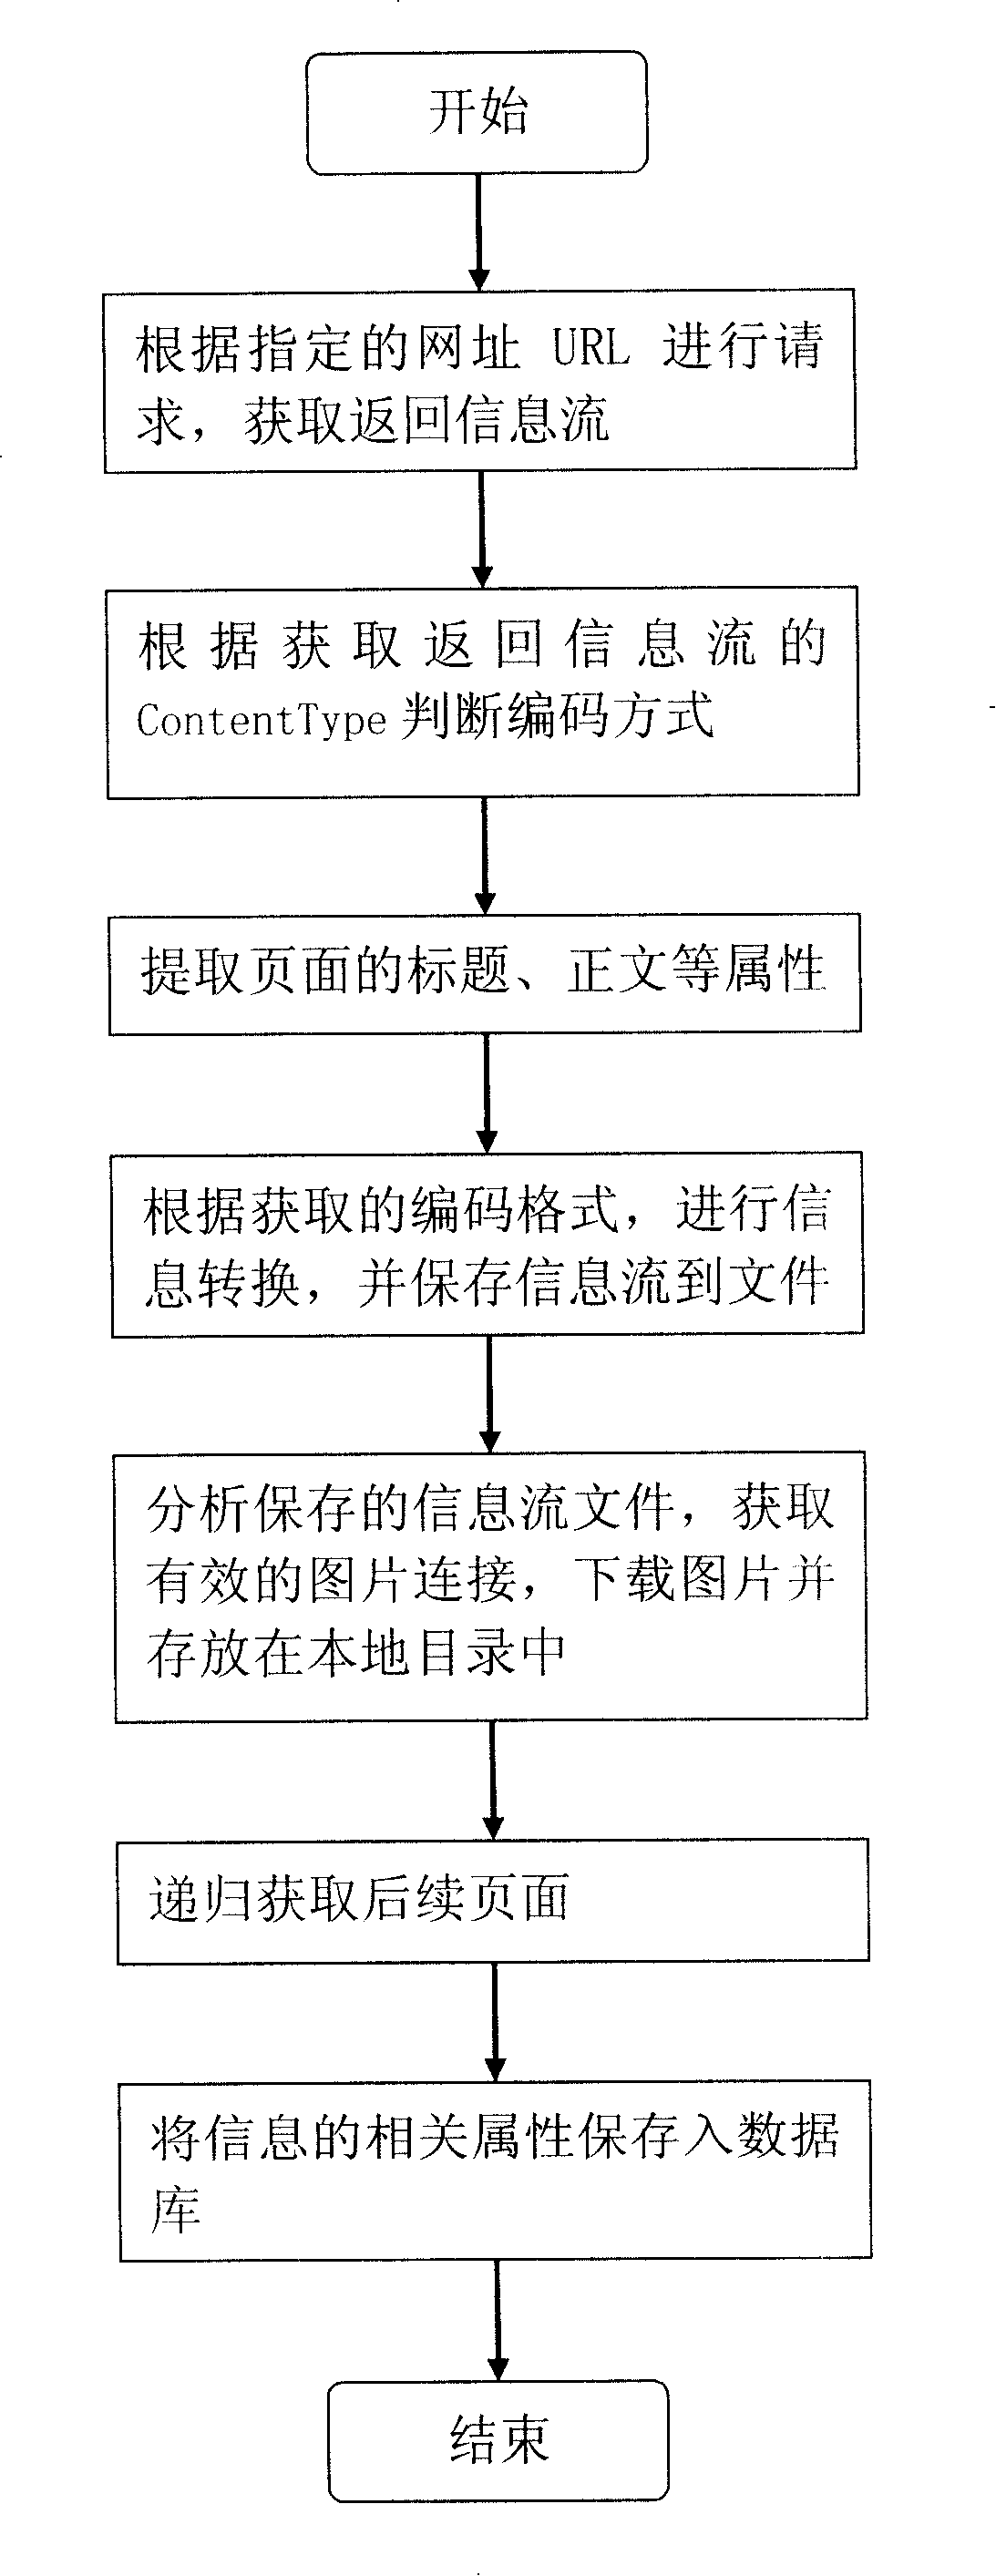 Network information automatic downloading and processing method